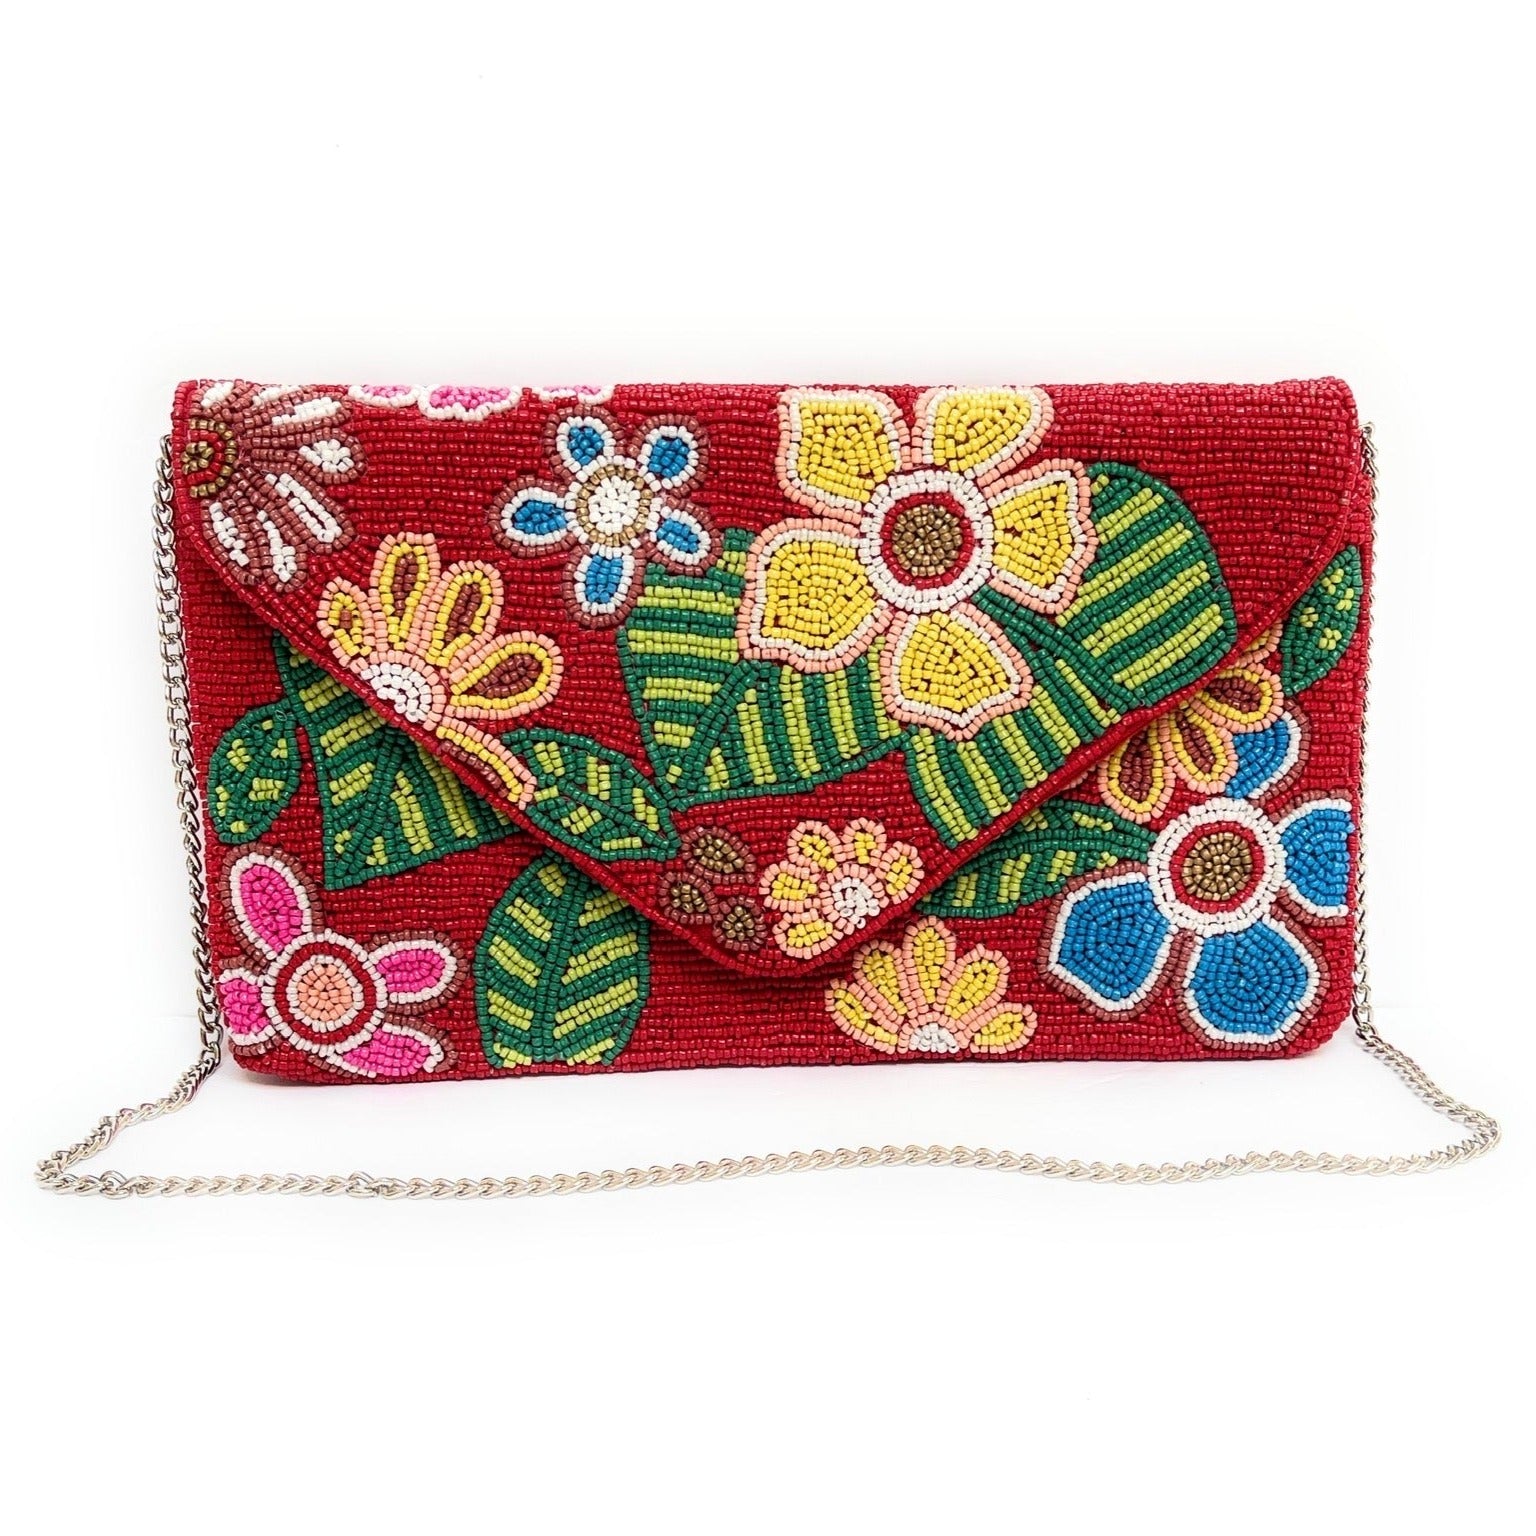 Dolce & Gabbana Red Leather Ayers Clutch Purse Wristlet Hand | Lyst